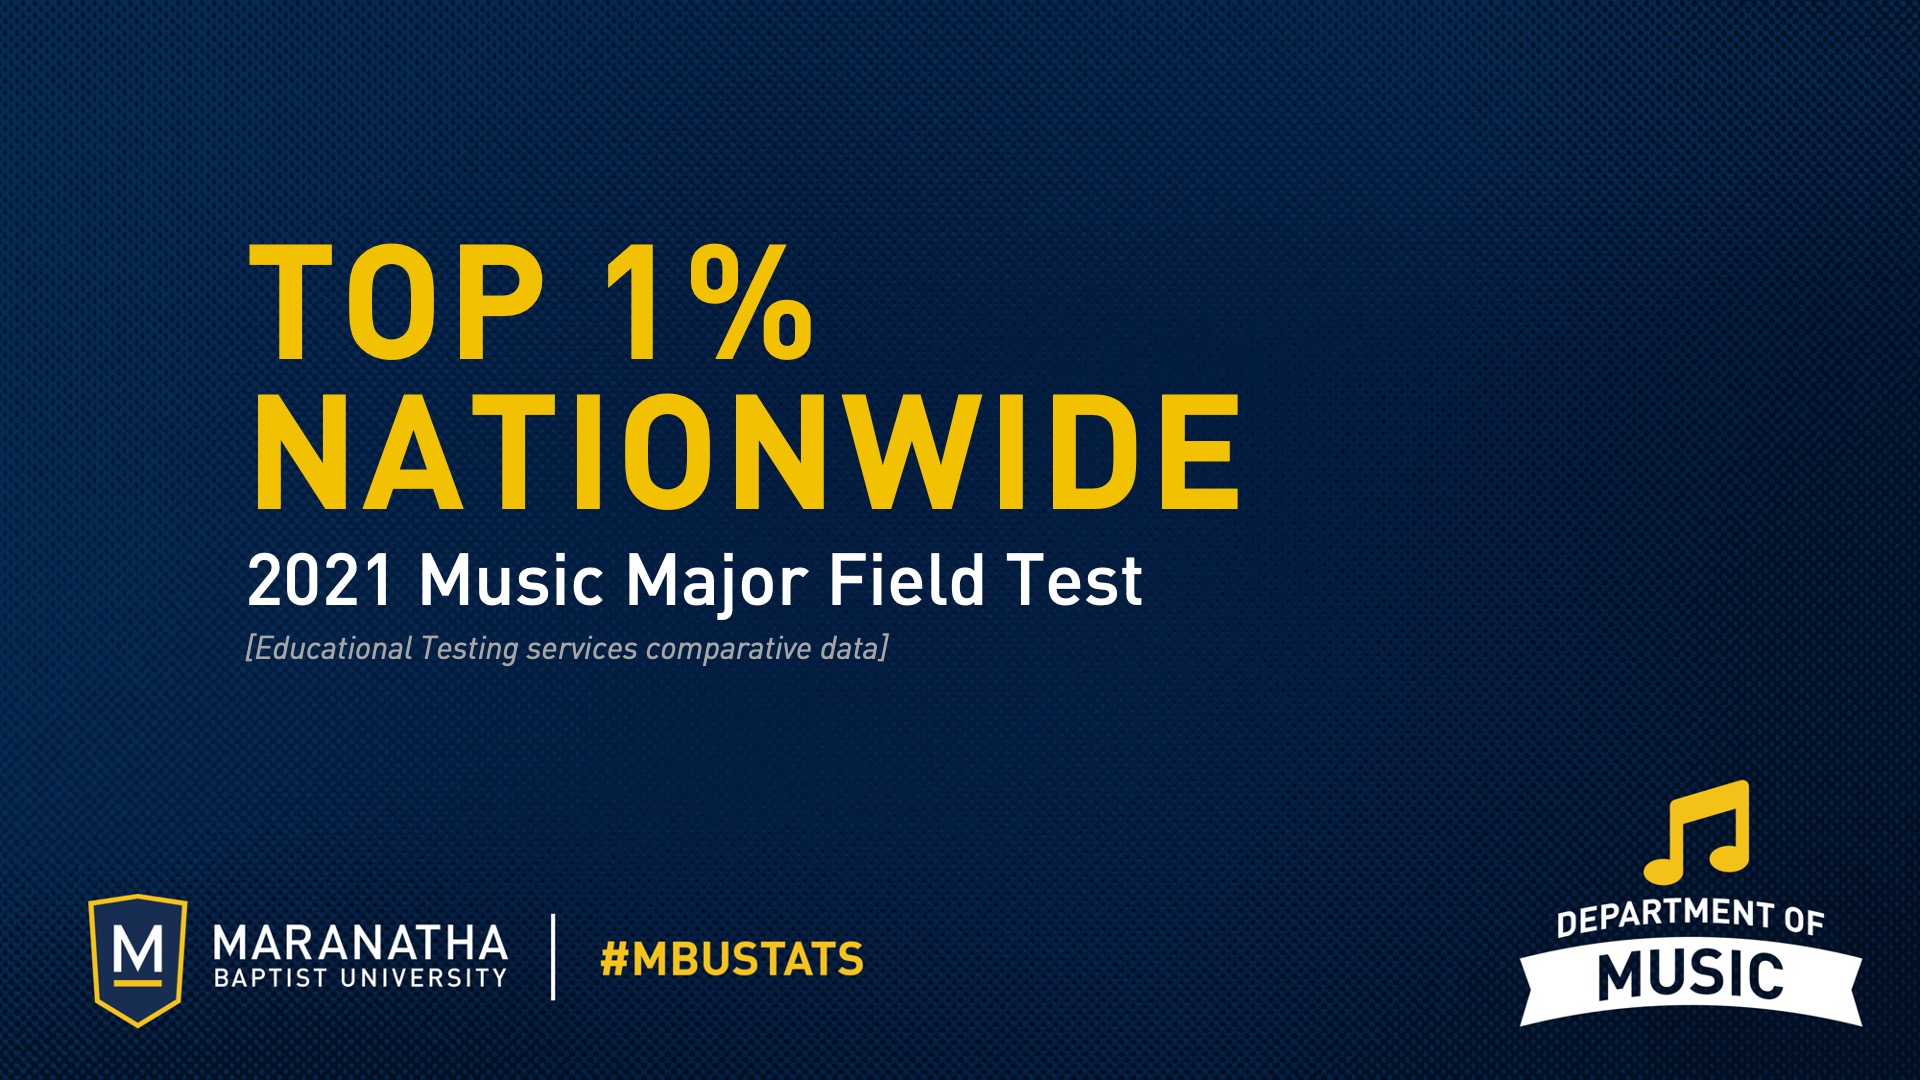 Maranatha students scored in the top 1% on the 2021 Music Major Field Test